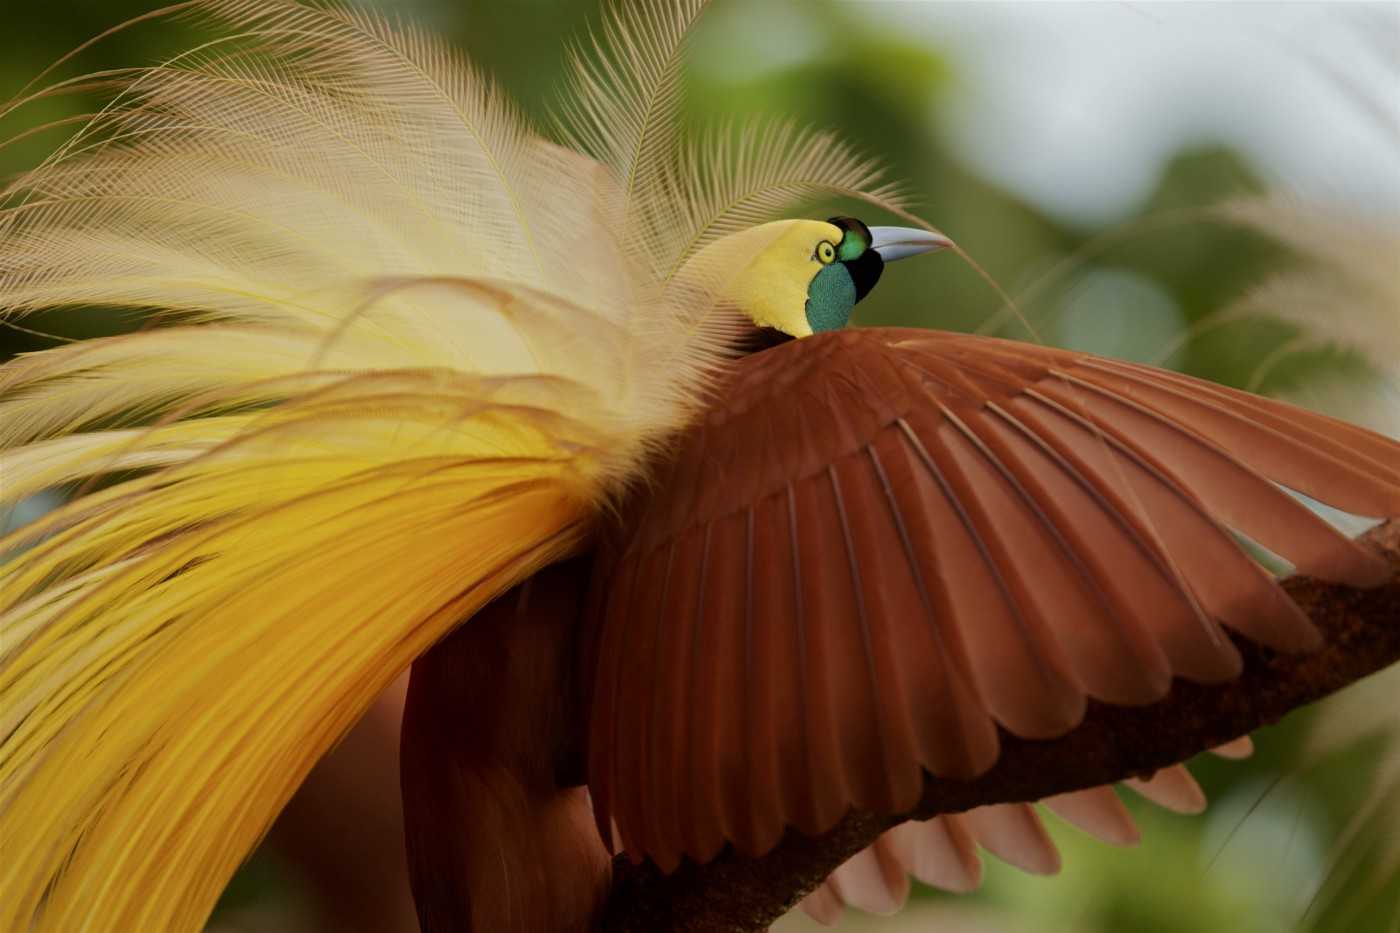 A Bird-of-Paradise captured by Tim Laman as part of his work in the Aru Islands with Cornell Lab of Ornithology Scientist Edwin Scholes and their Birds-of-Paradise Project.*